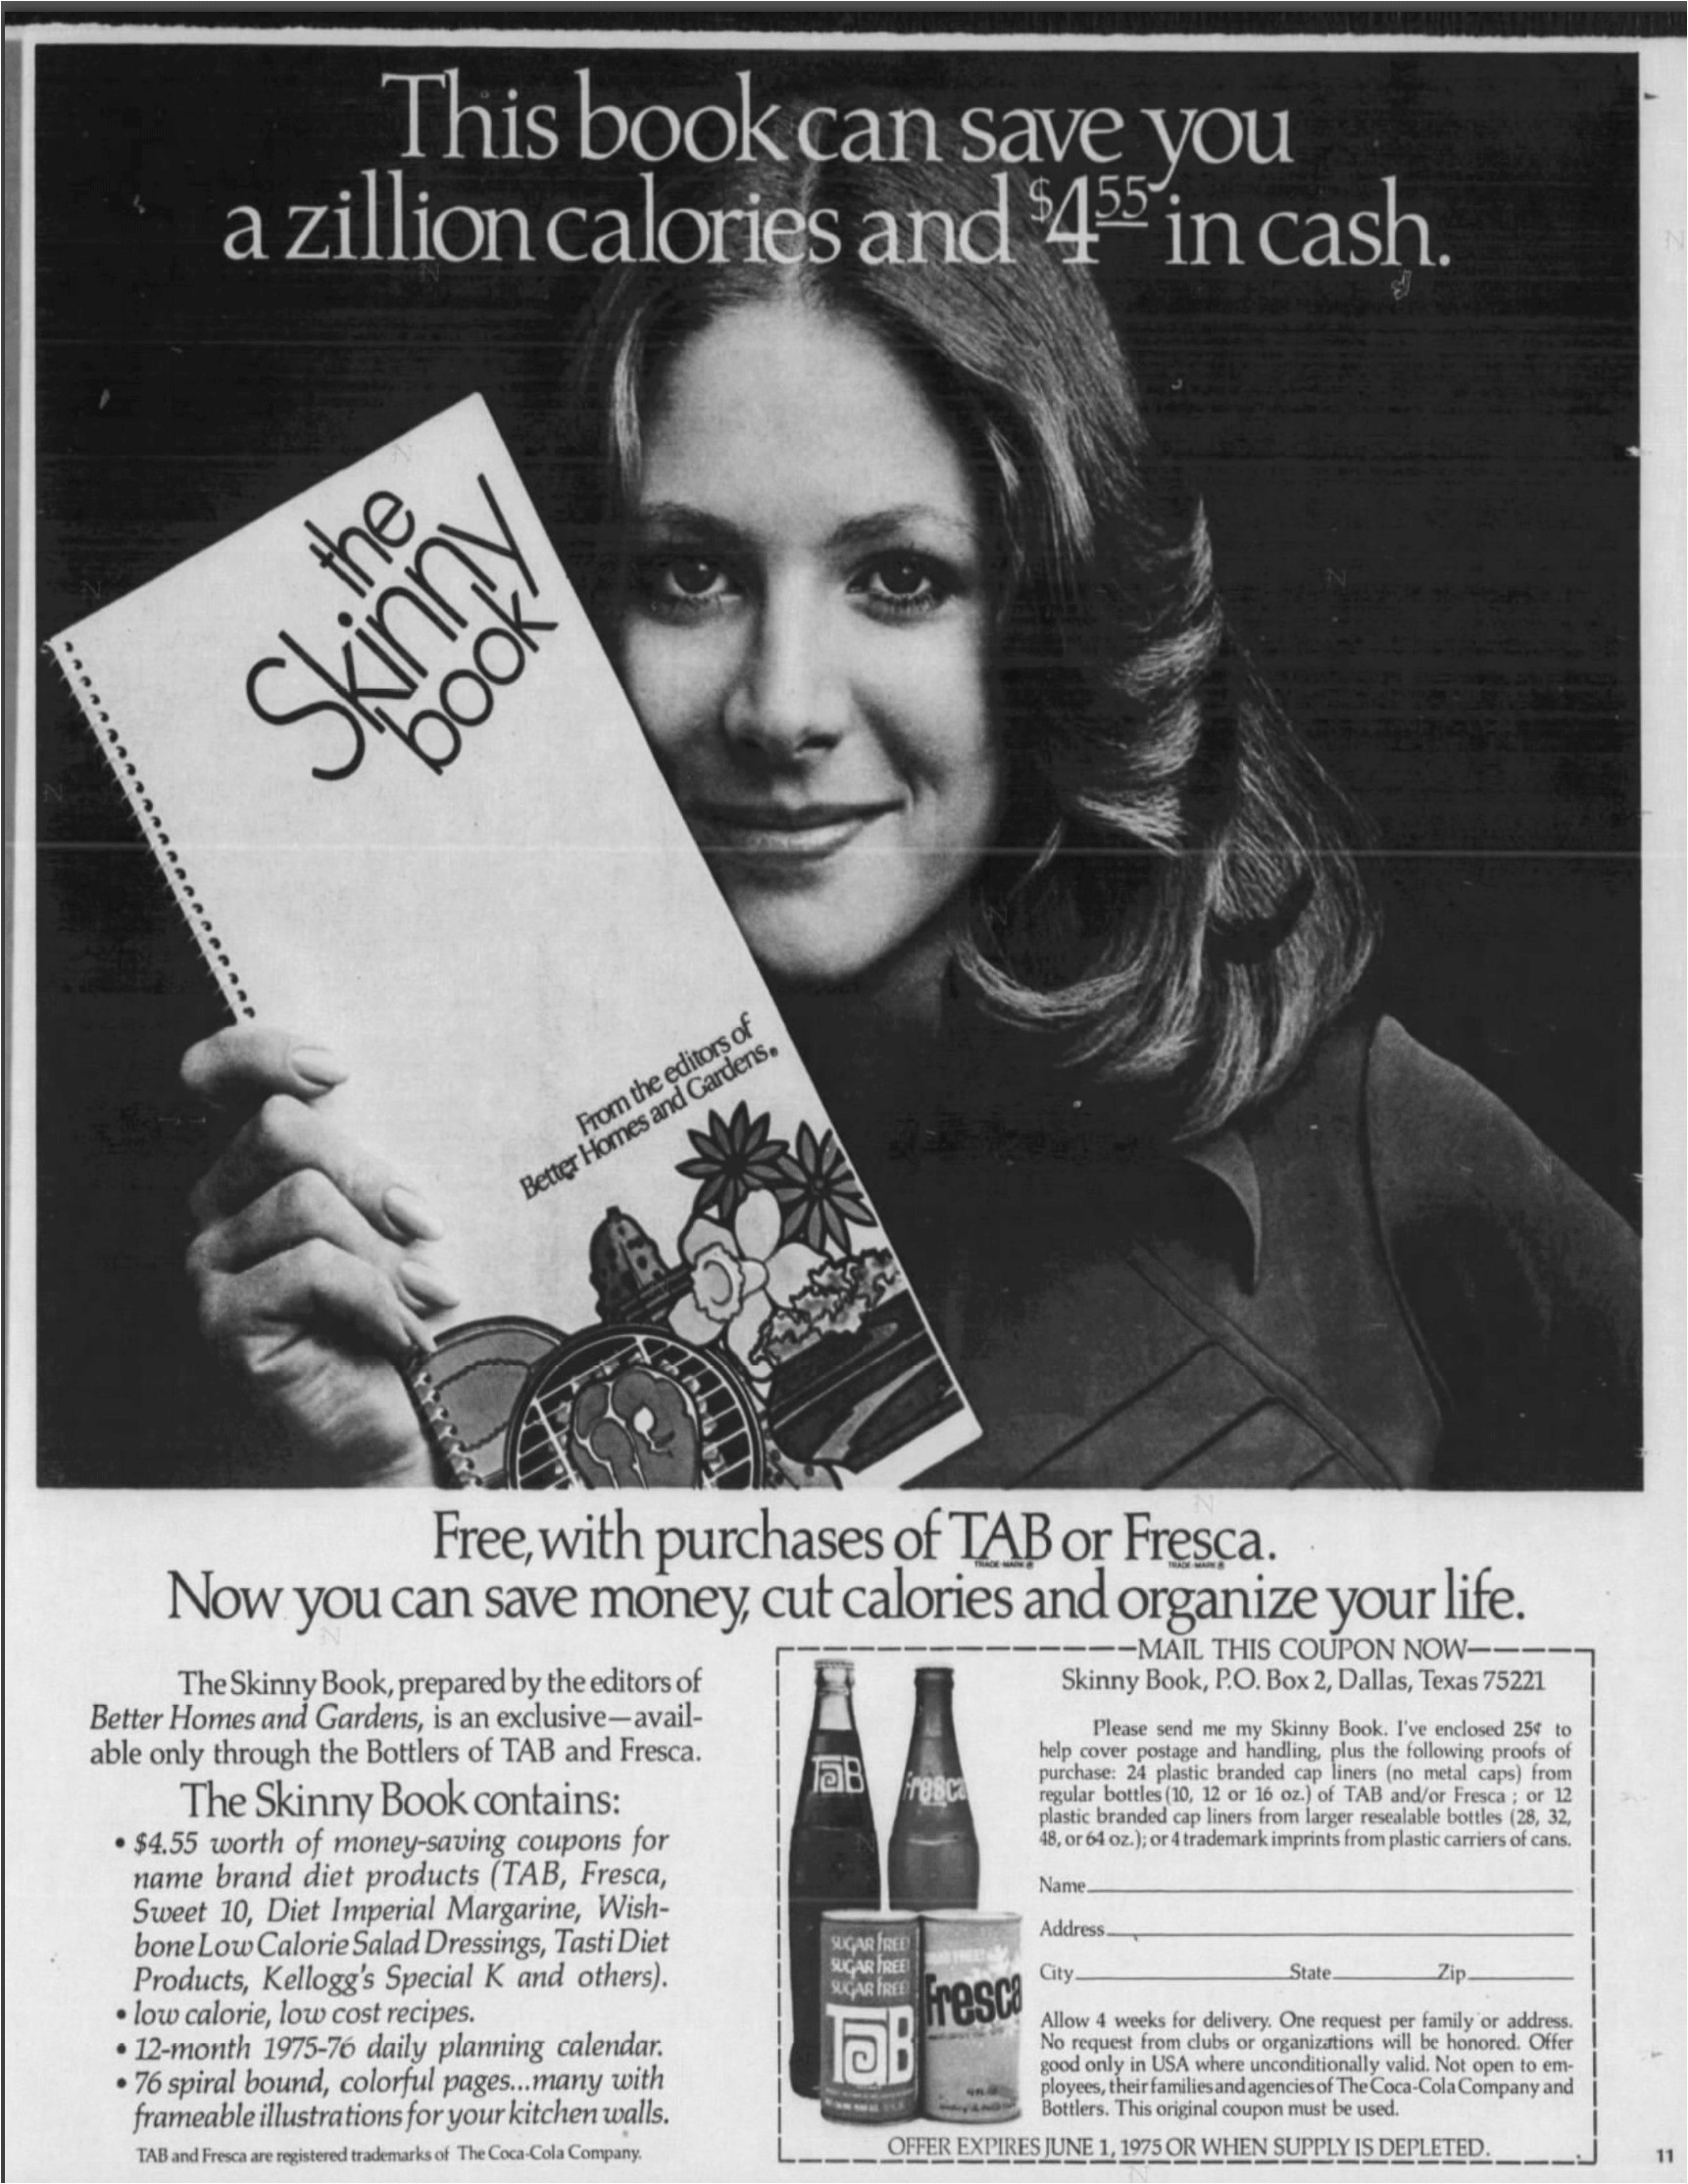 in 1975 the honolulu star published this tab fresca promotion for the skinny book